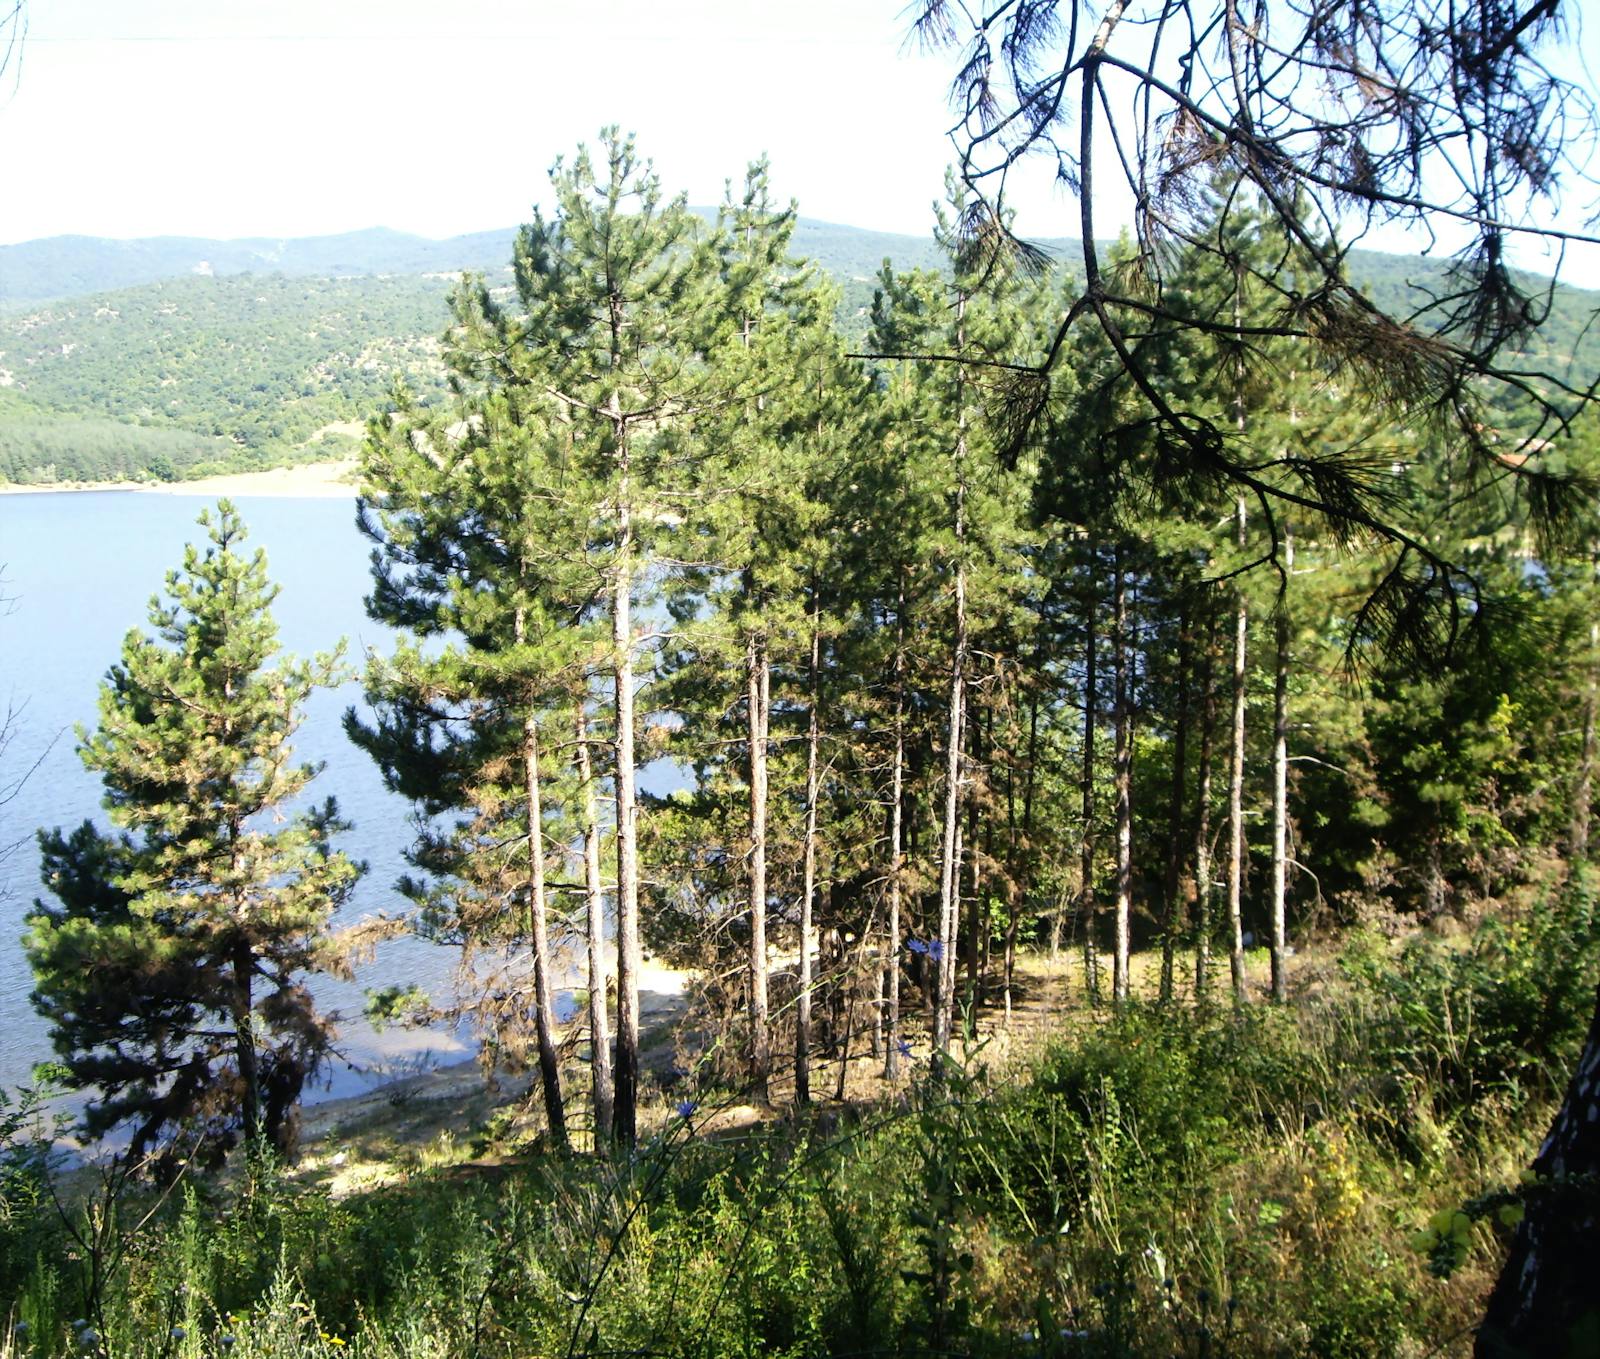 Dinaric Mountains Mixed Forests